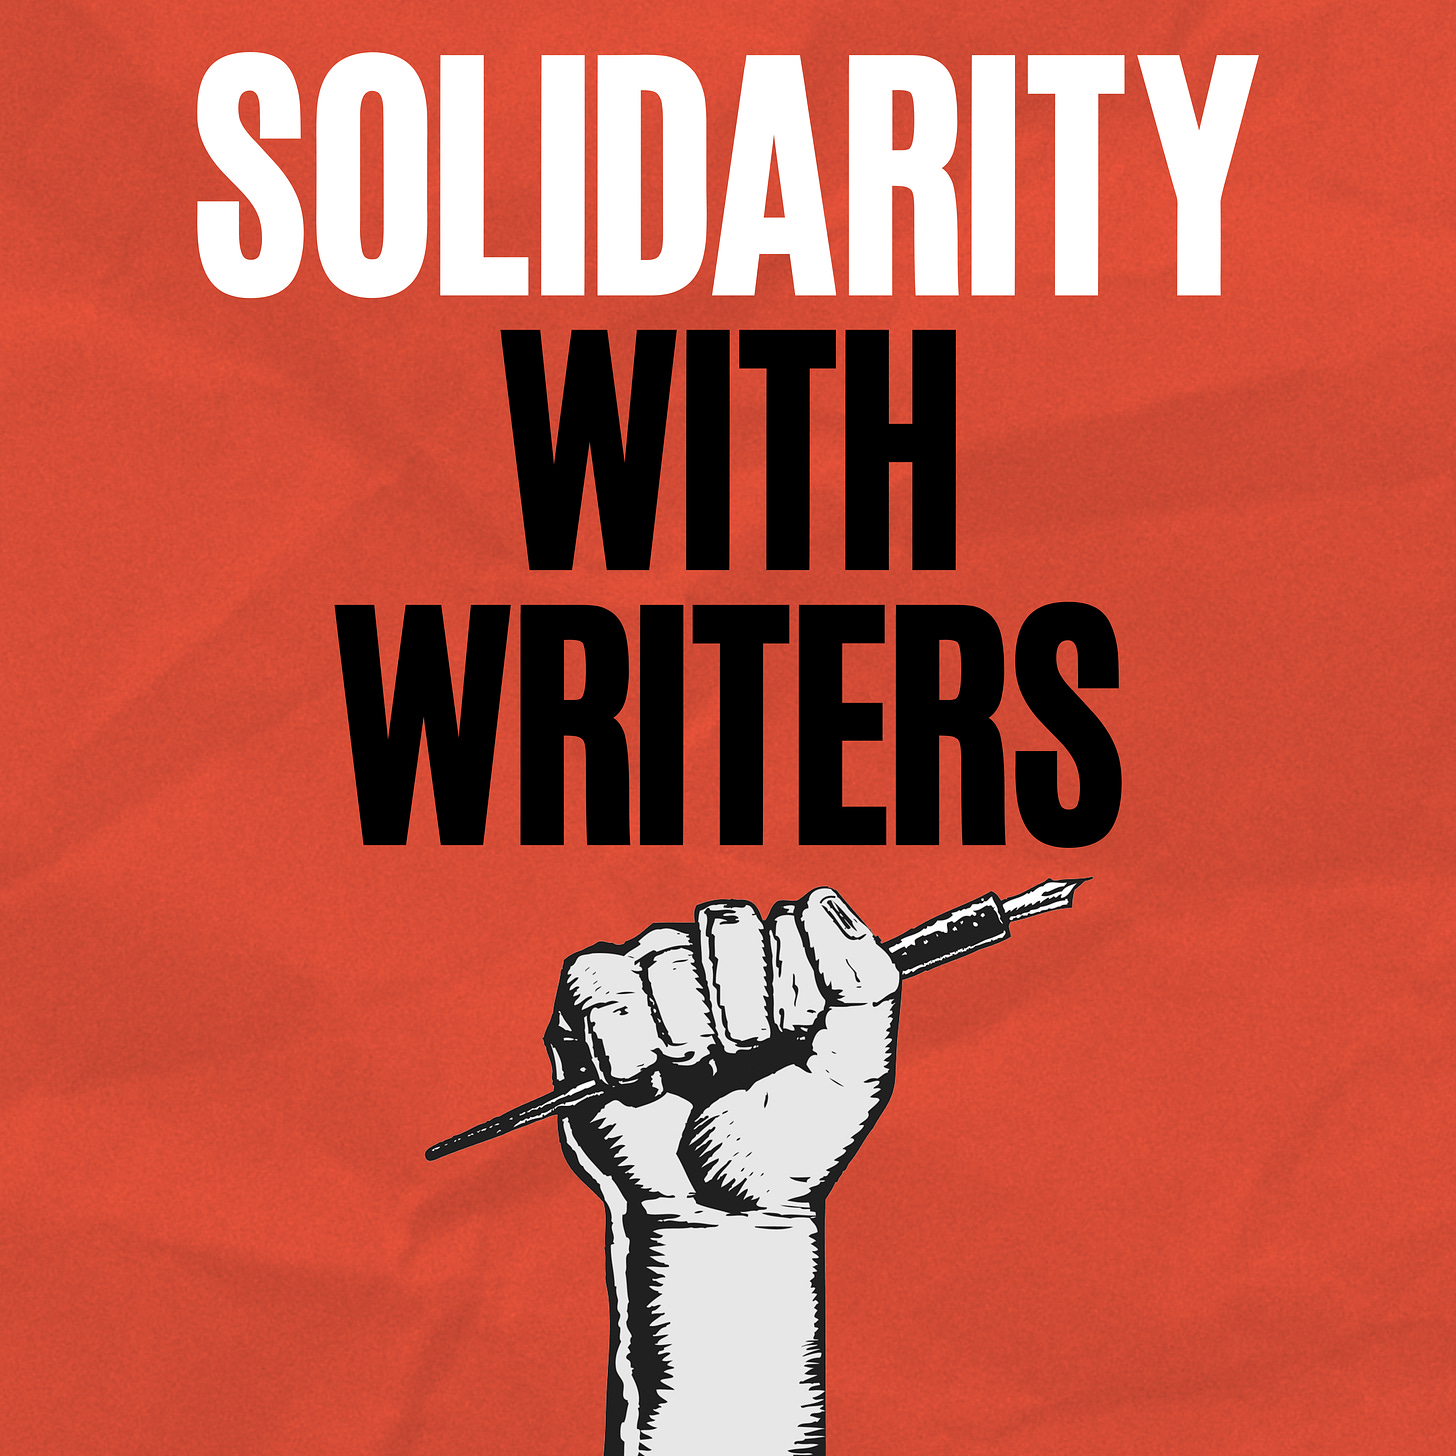 WGA Strike image: Captioned Solidarity With Writers over solid color background. Image of a fist clutching a fountain pen in black and white.